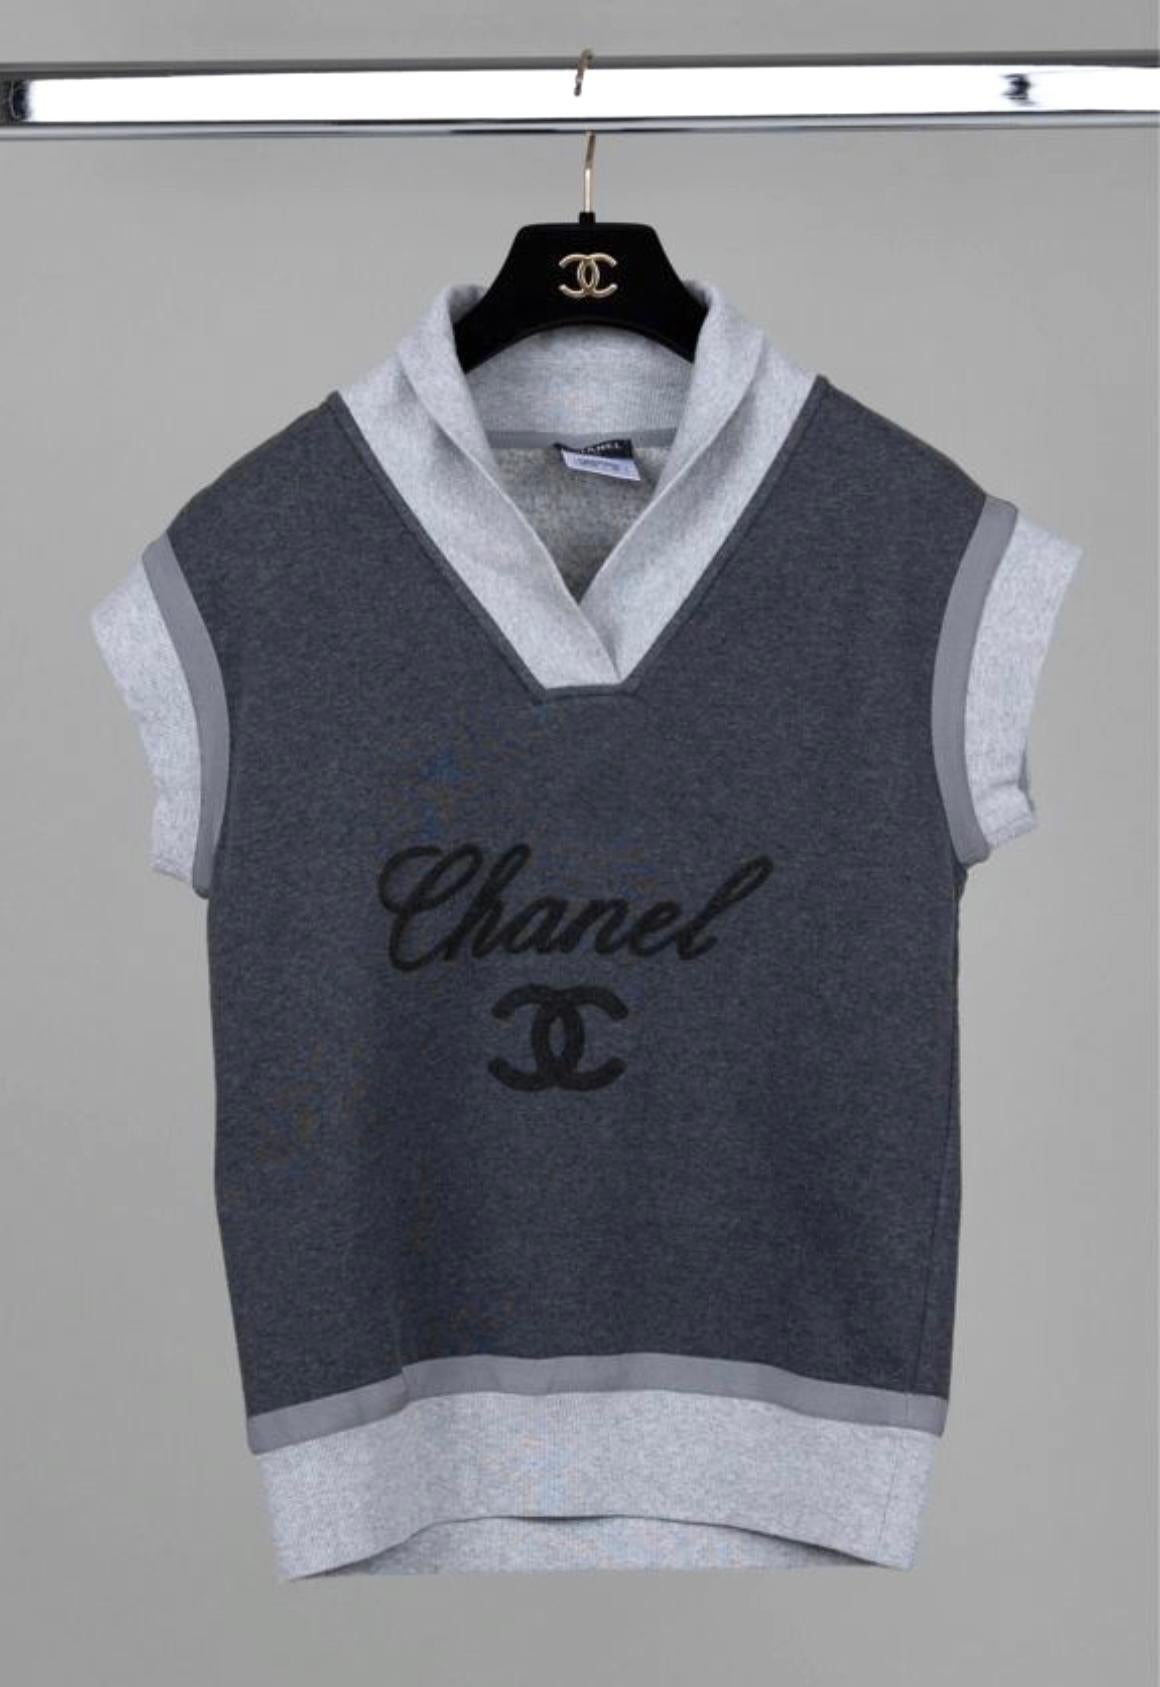 Super stylish Chanel grey jumper vest with CC logo and brand's name at centre front
Size mark 38 FR. Condition is pristine, no signs of wear